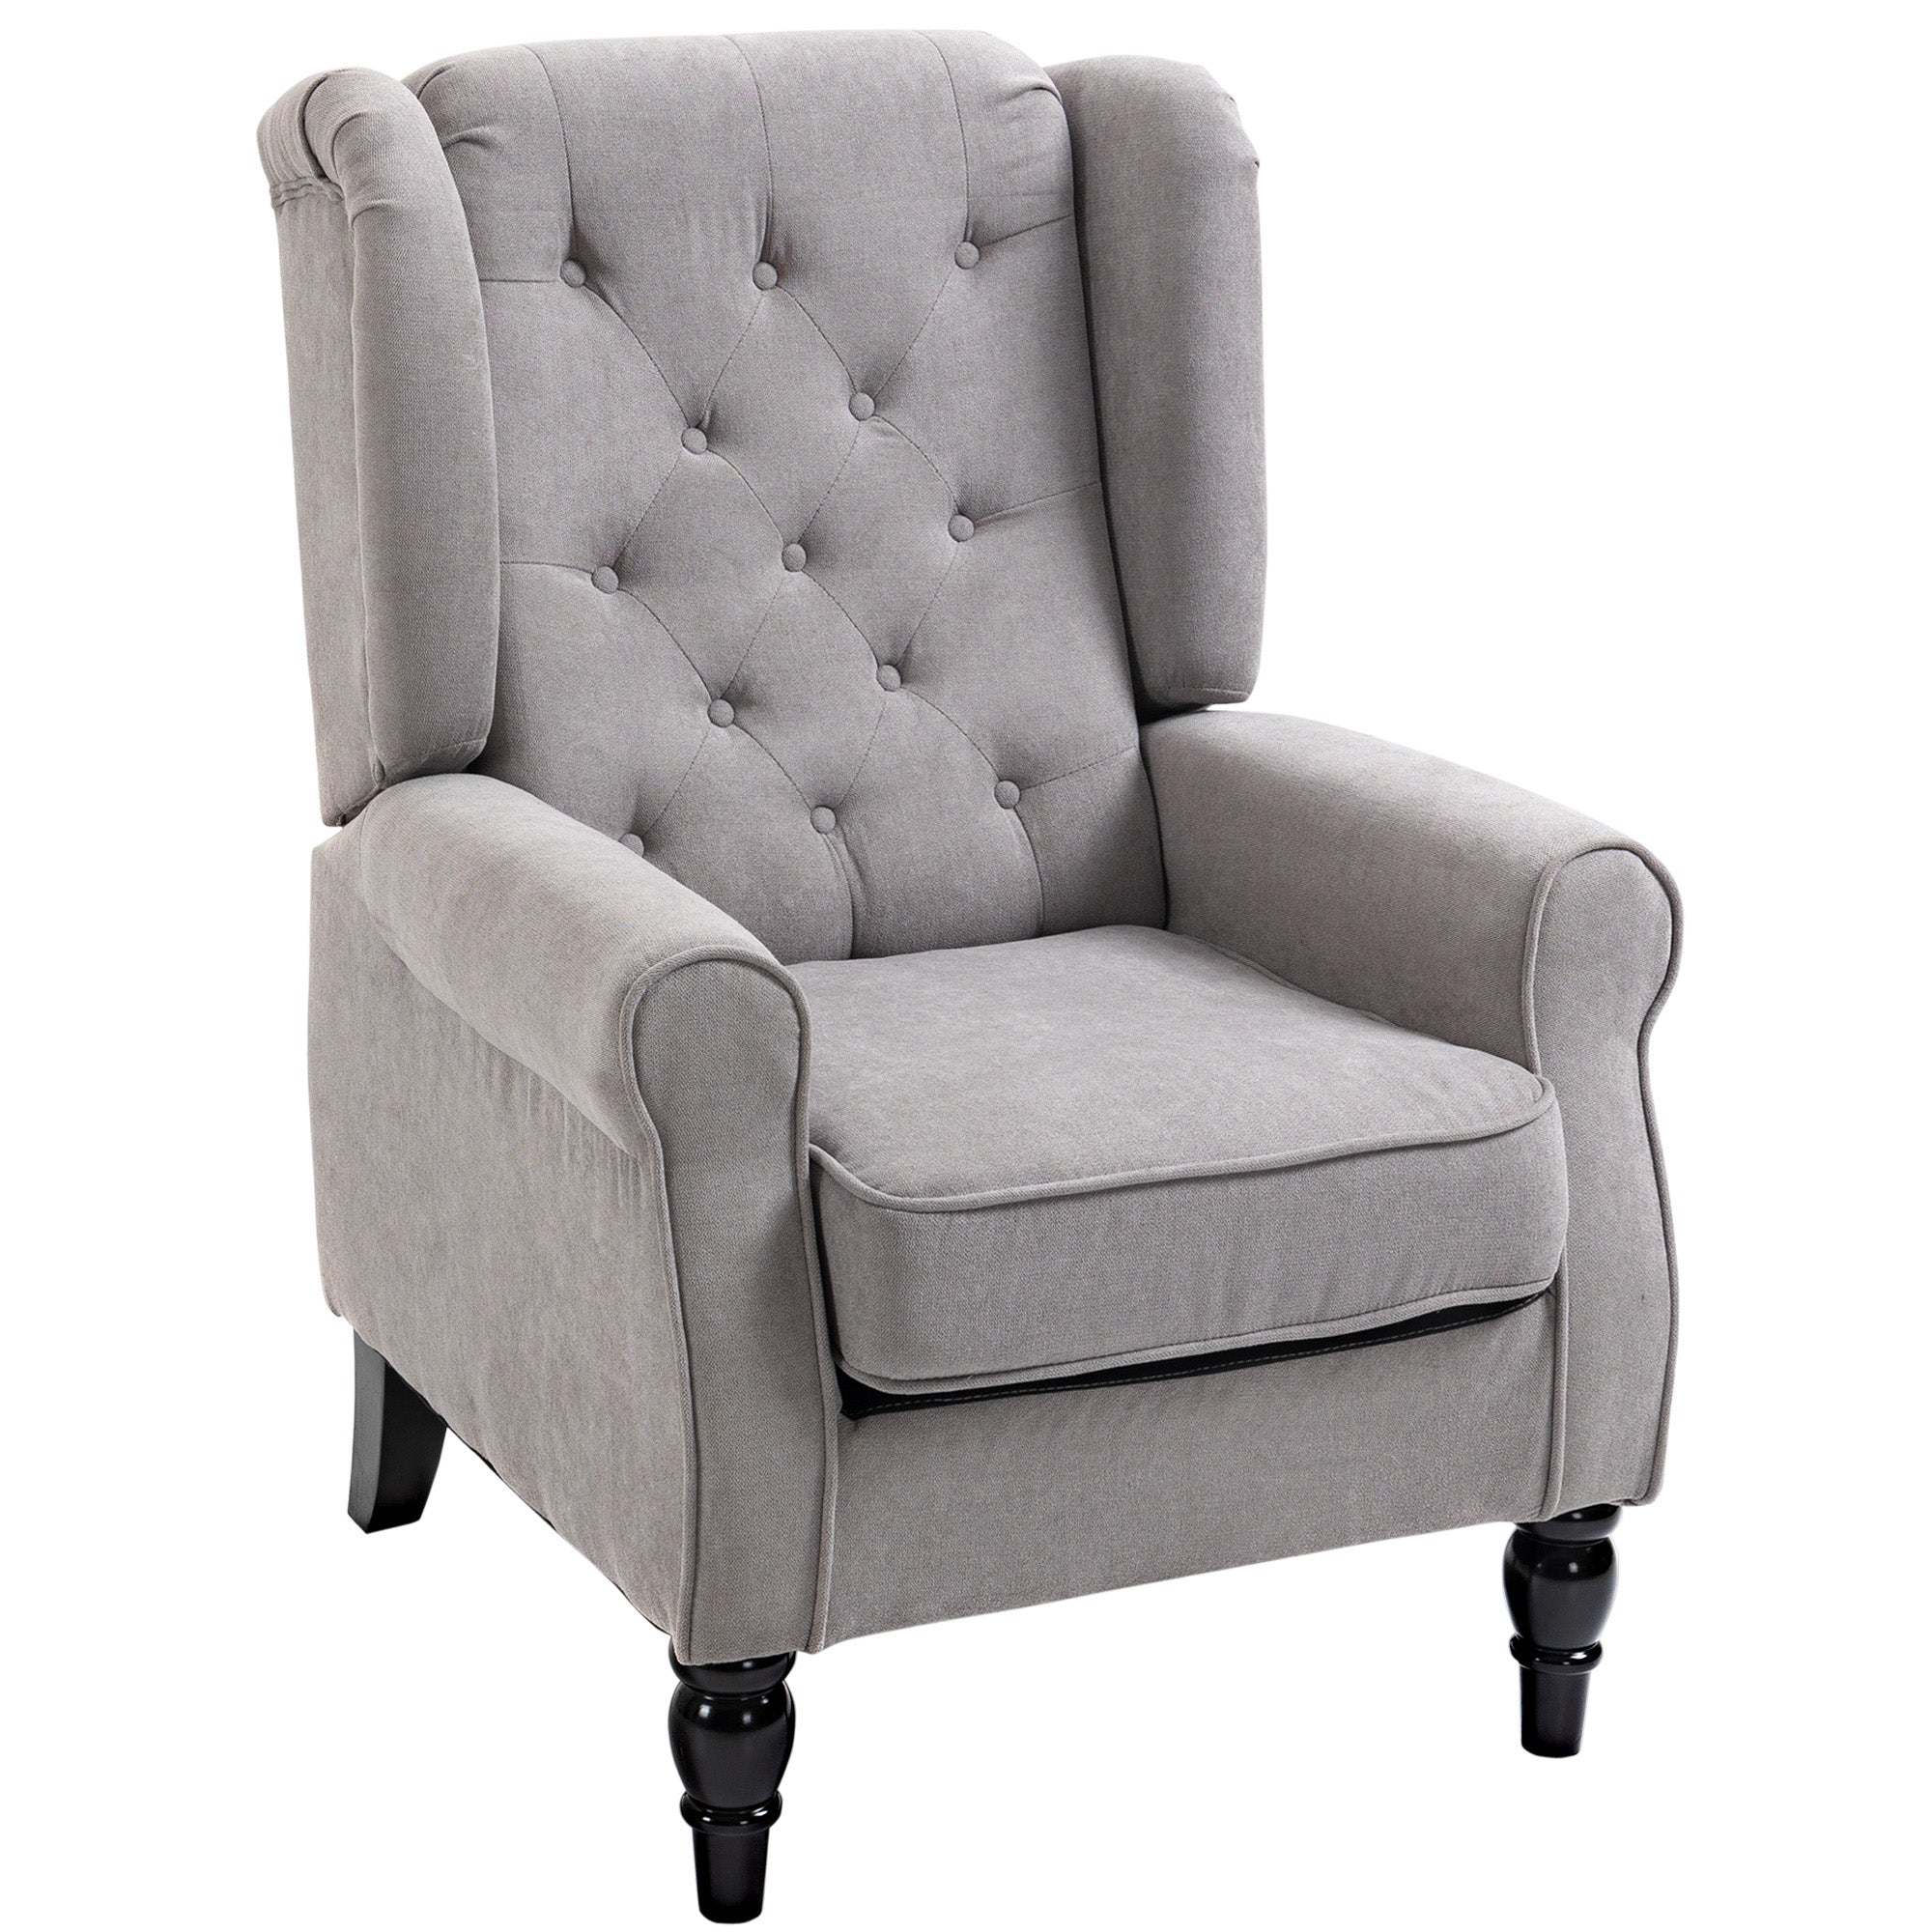 Retro Accent Chair, Wingback Armchair with Wood Frame Button Tufted Design for Living Room Bedroom, Grey-0